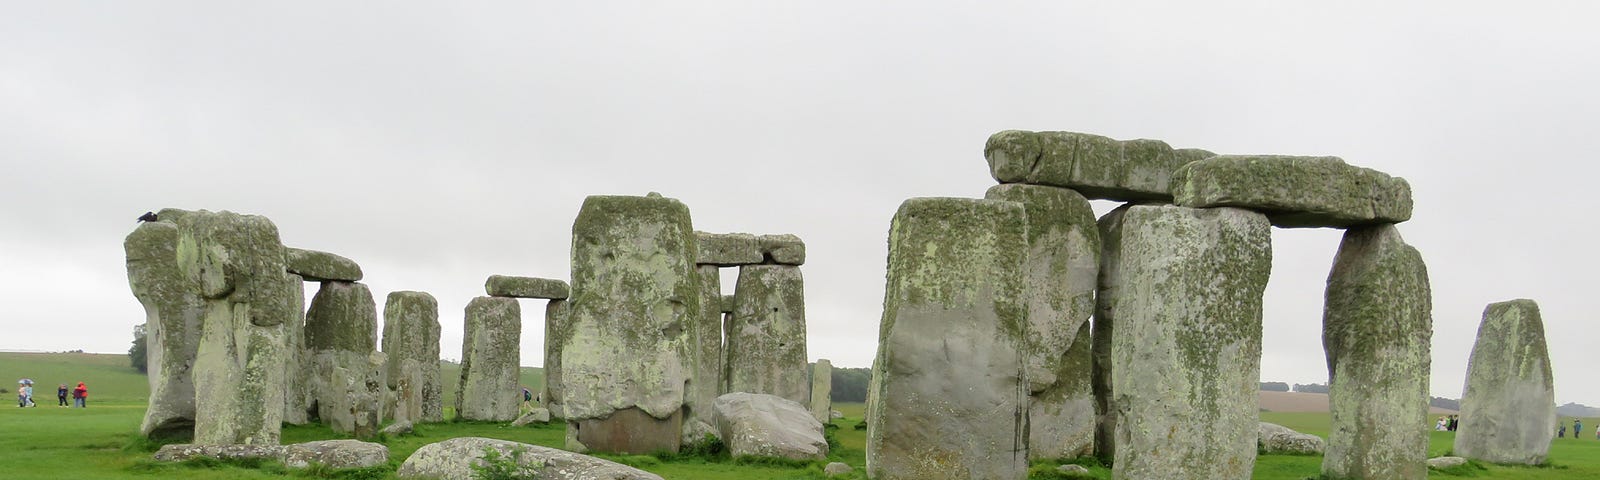 Stonehenge on a grey drizzling day.